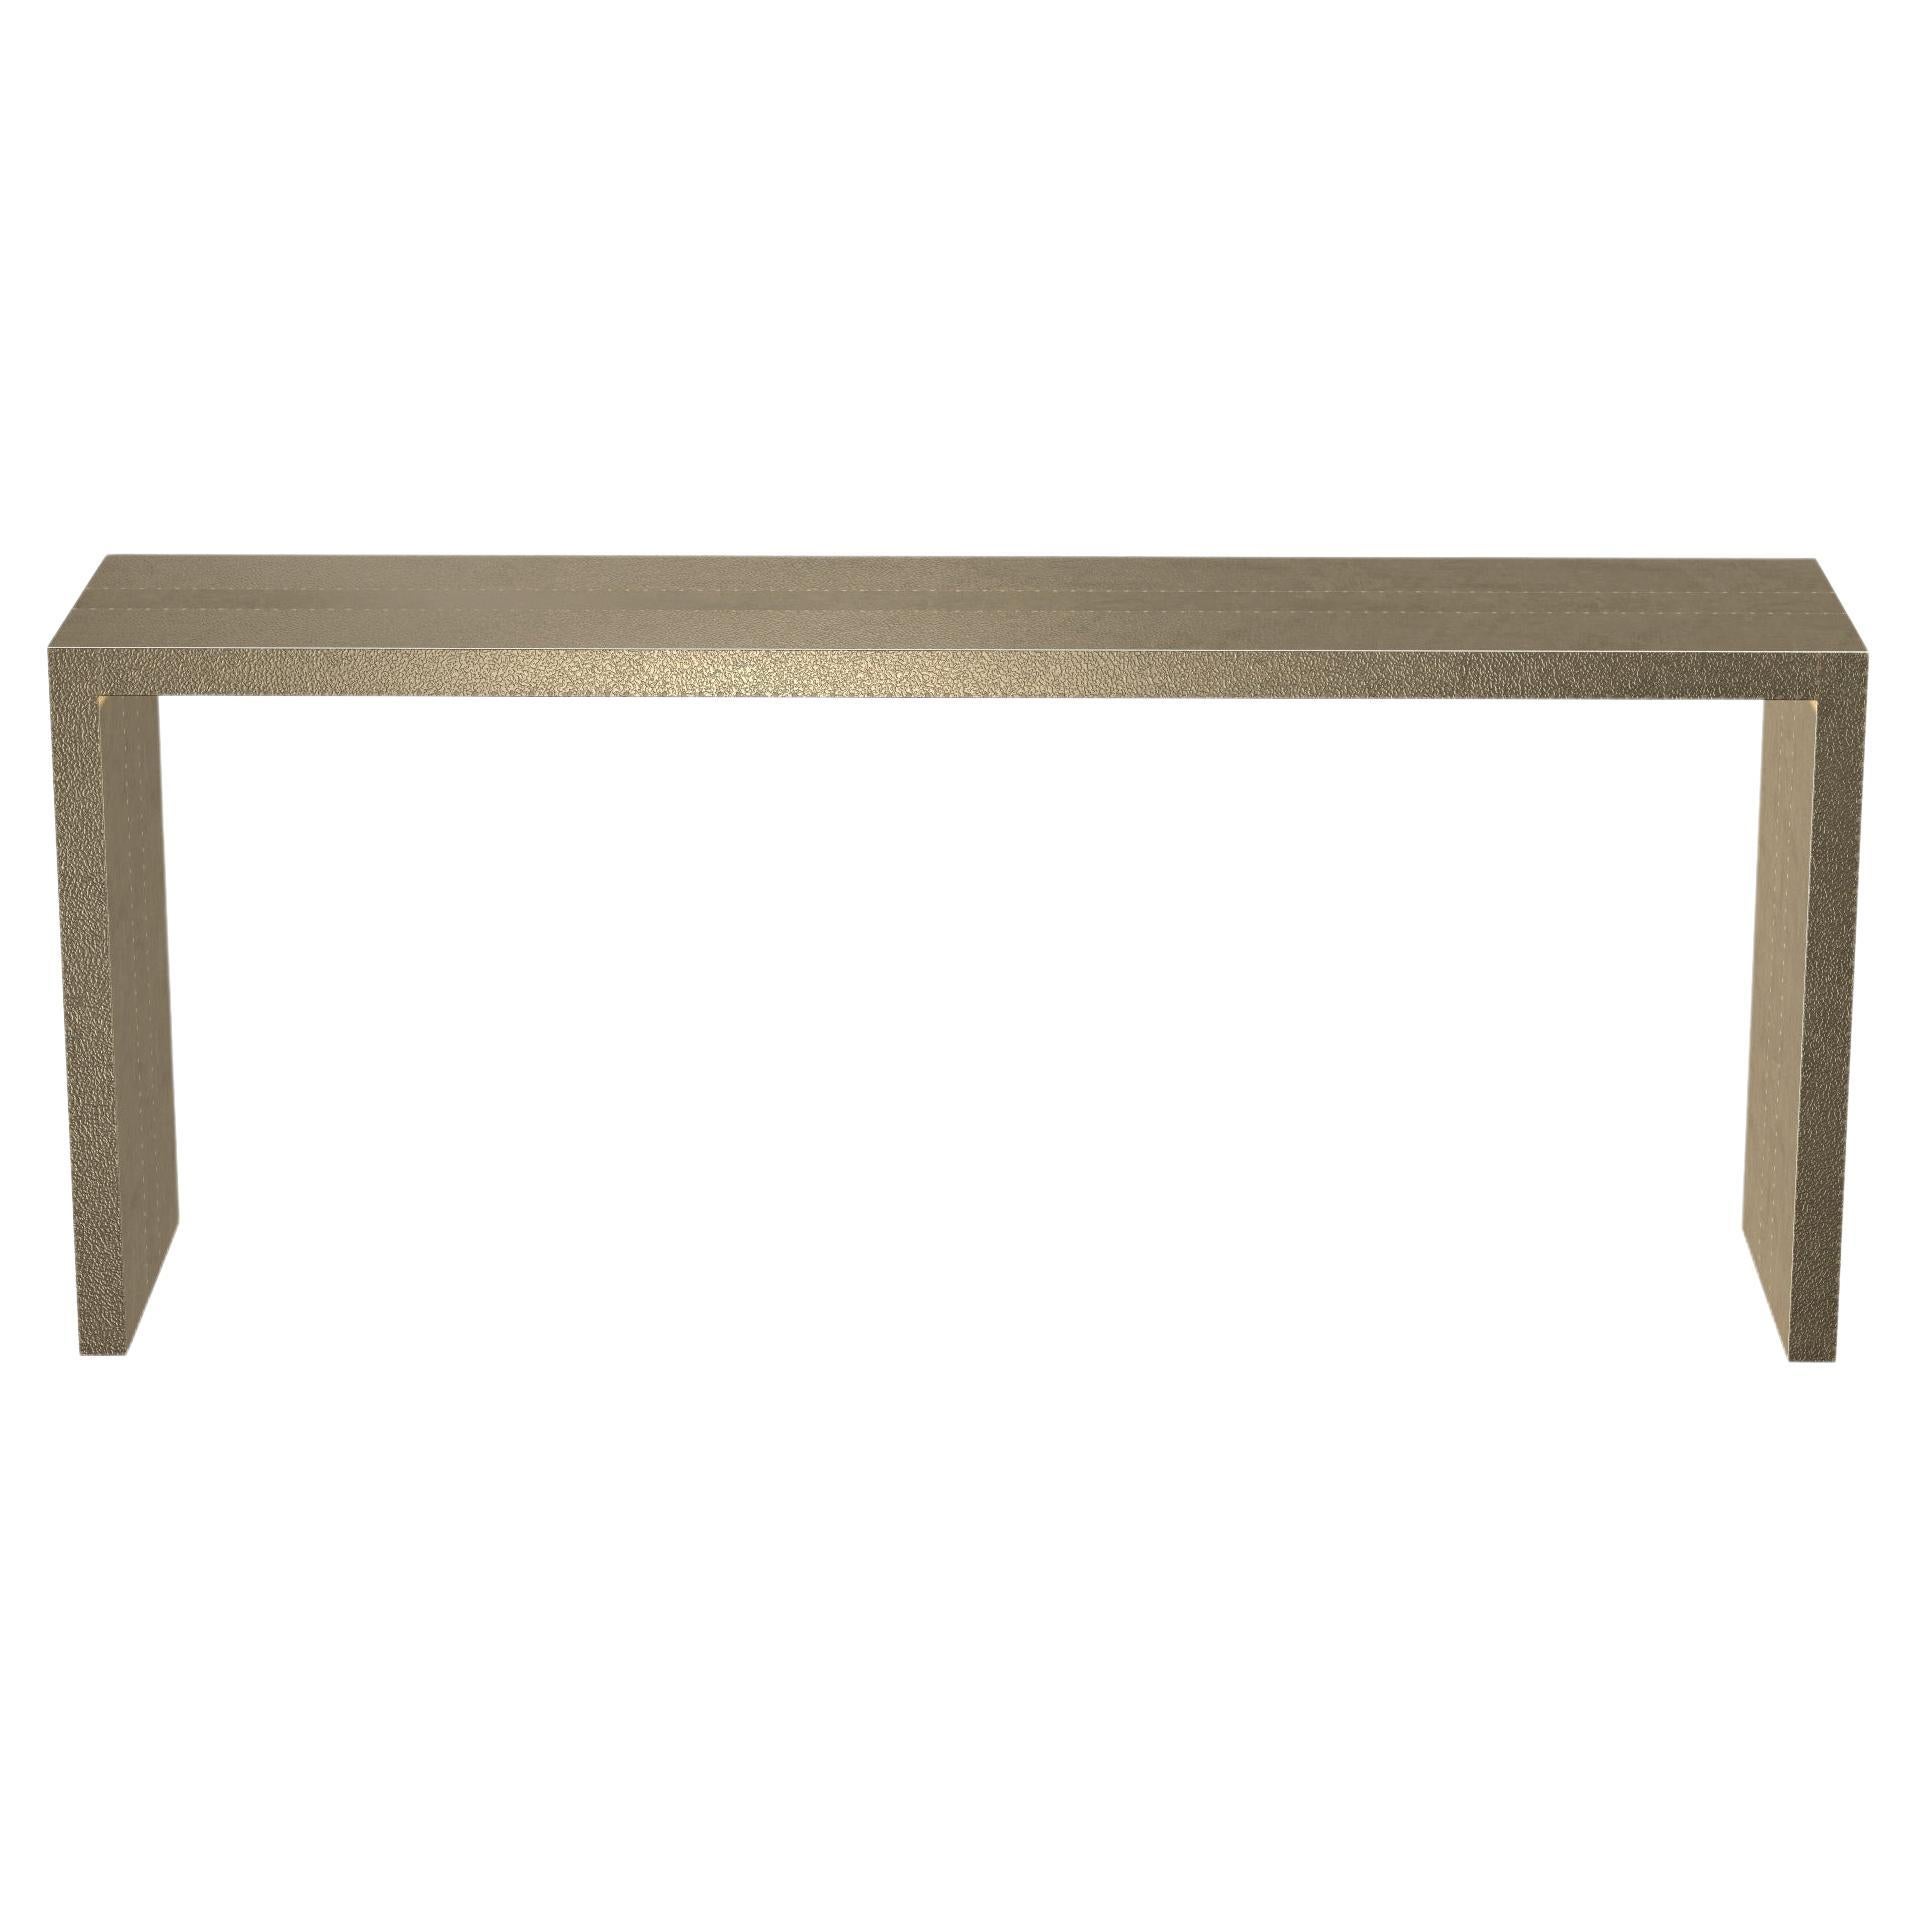 Art Deco Coffee and Cocktail Console Tables in Copper Fine Hammered  by Alison S For Sale